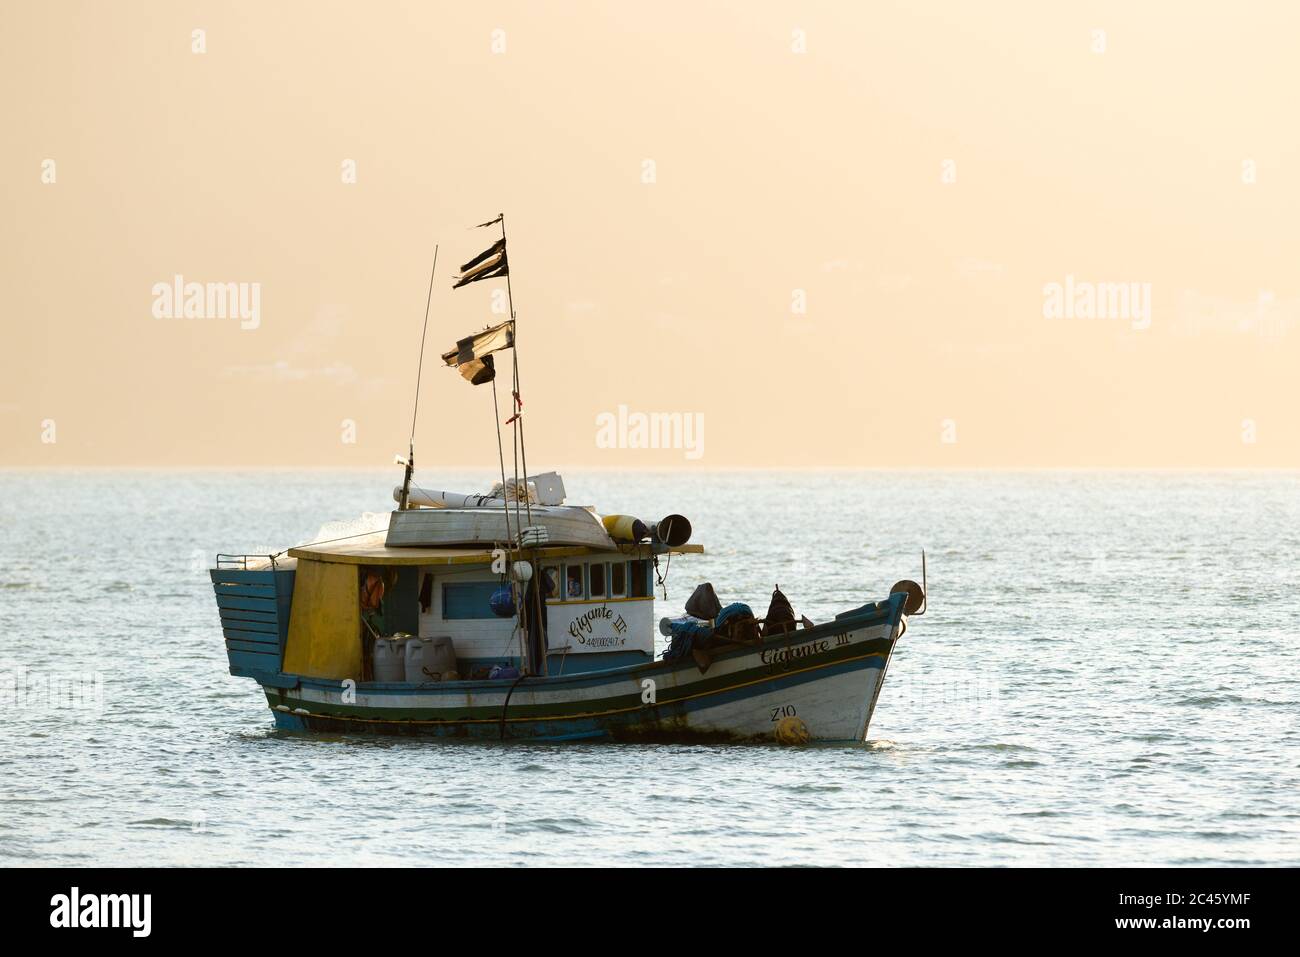 A traditional wooden fishing boat from Ilhabela, SE Brazil Stock Photo